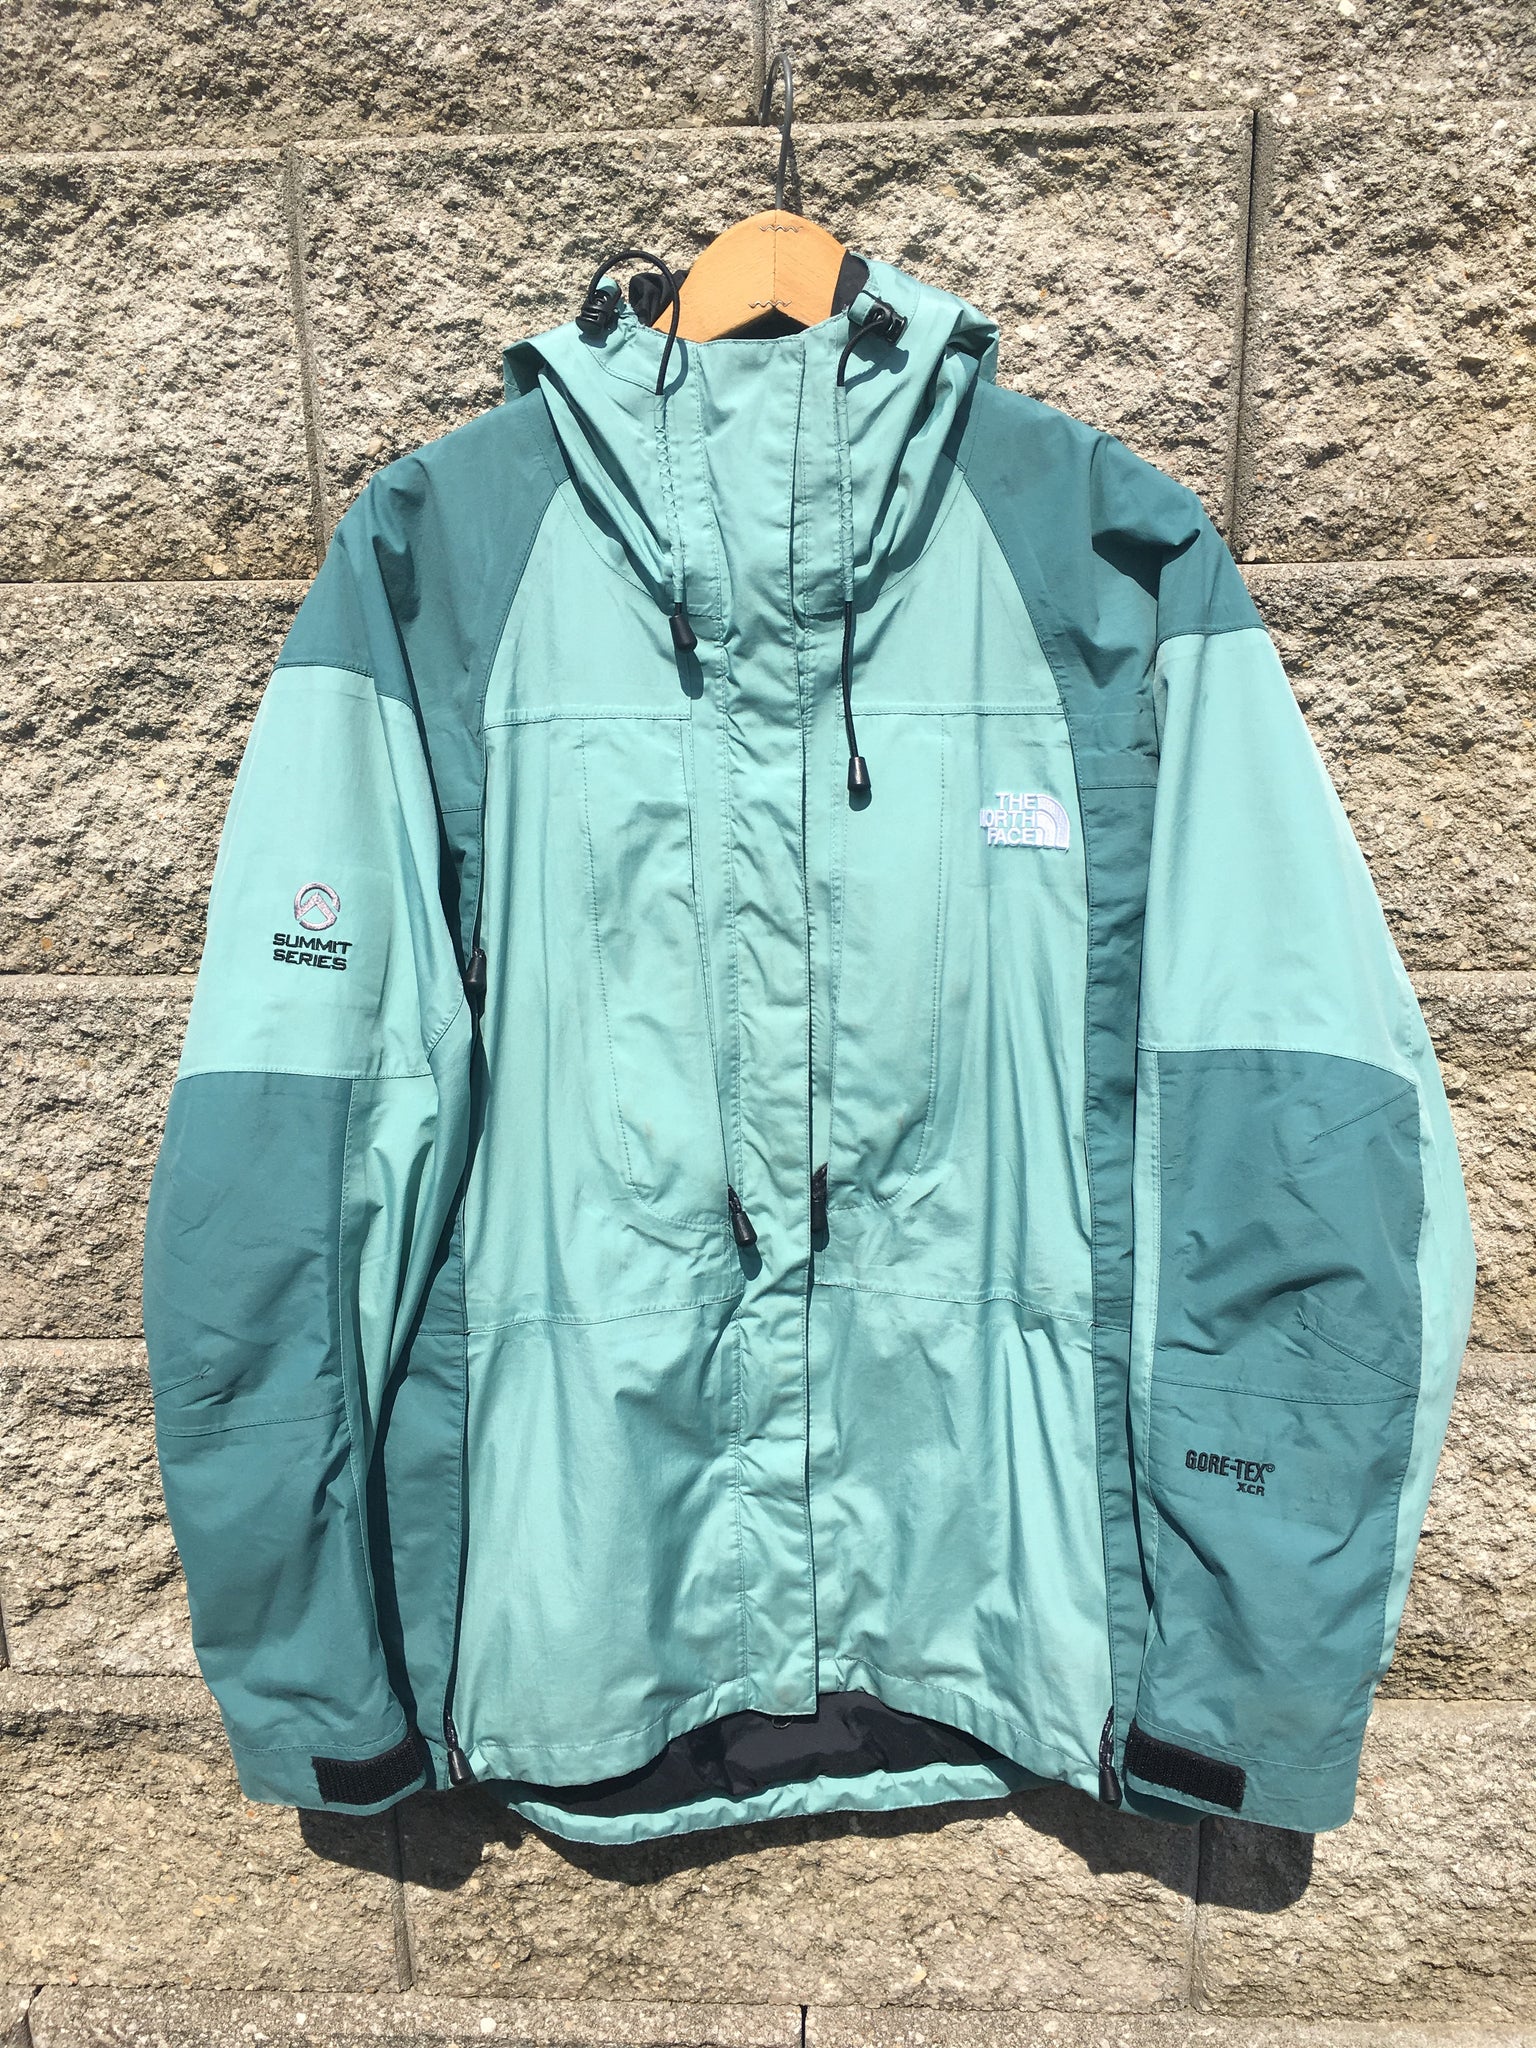 2x north face jackets